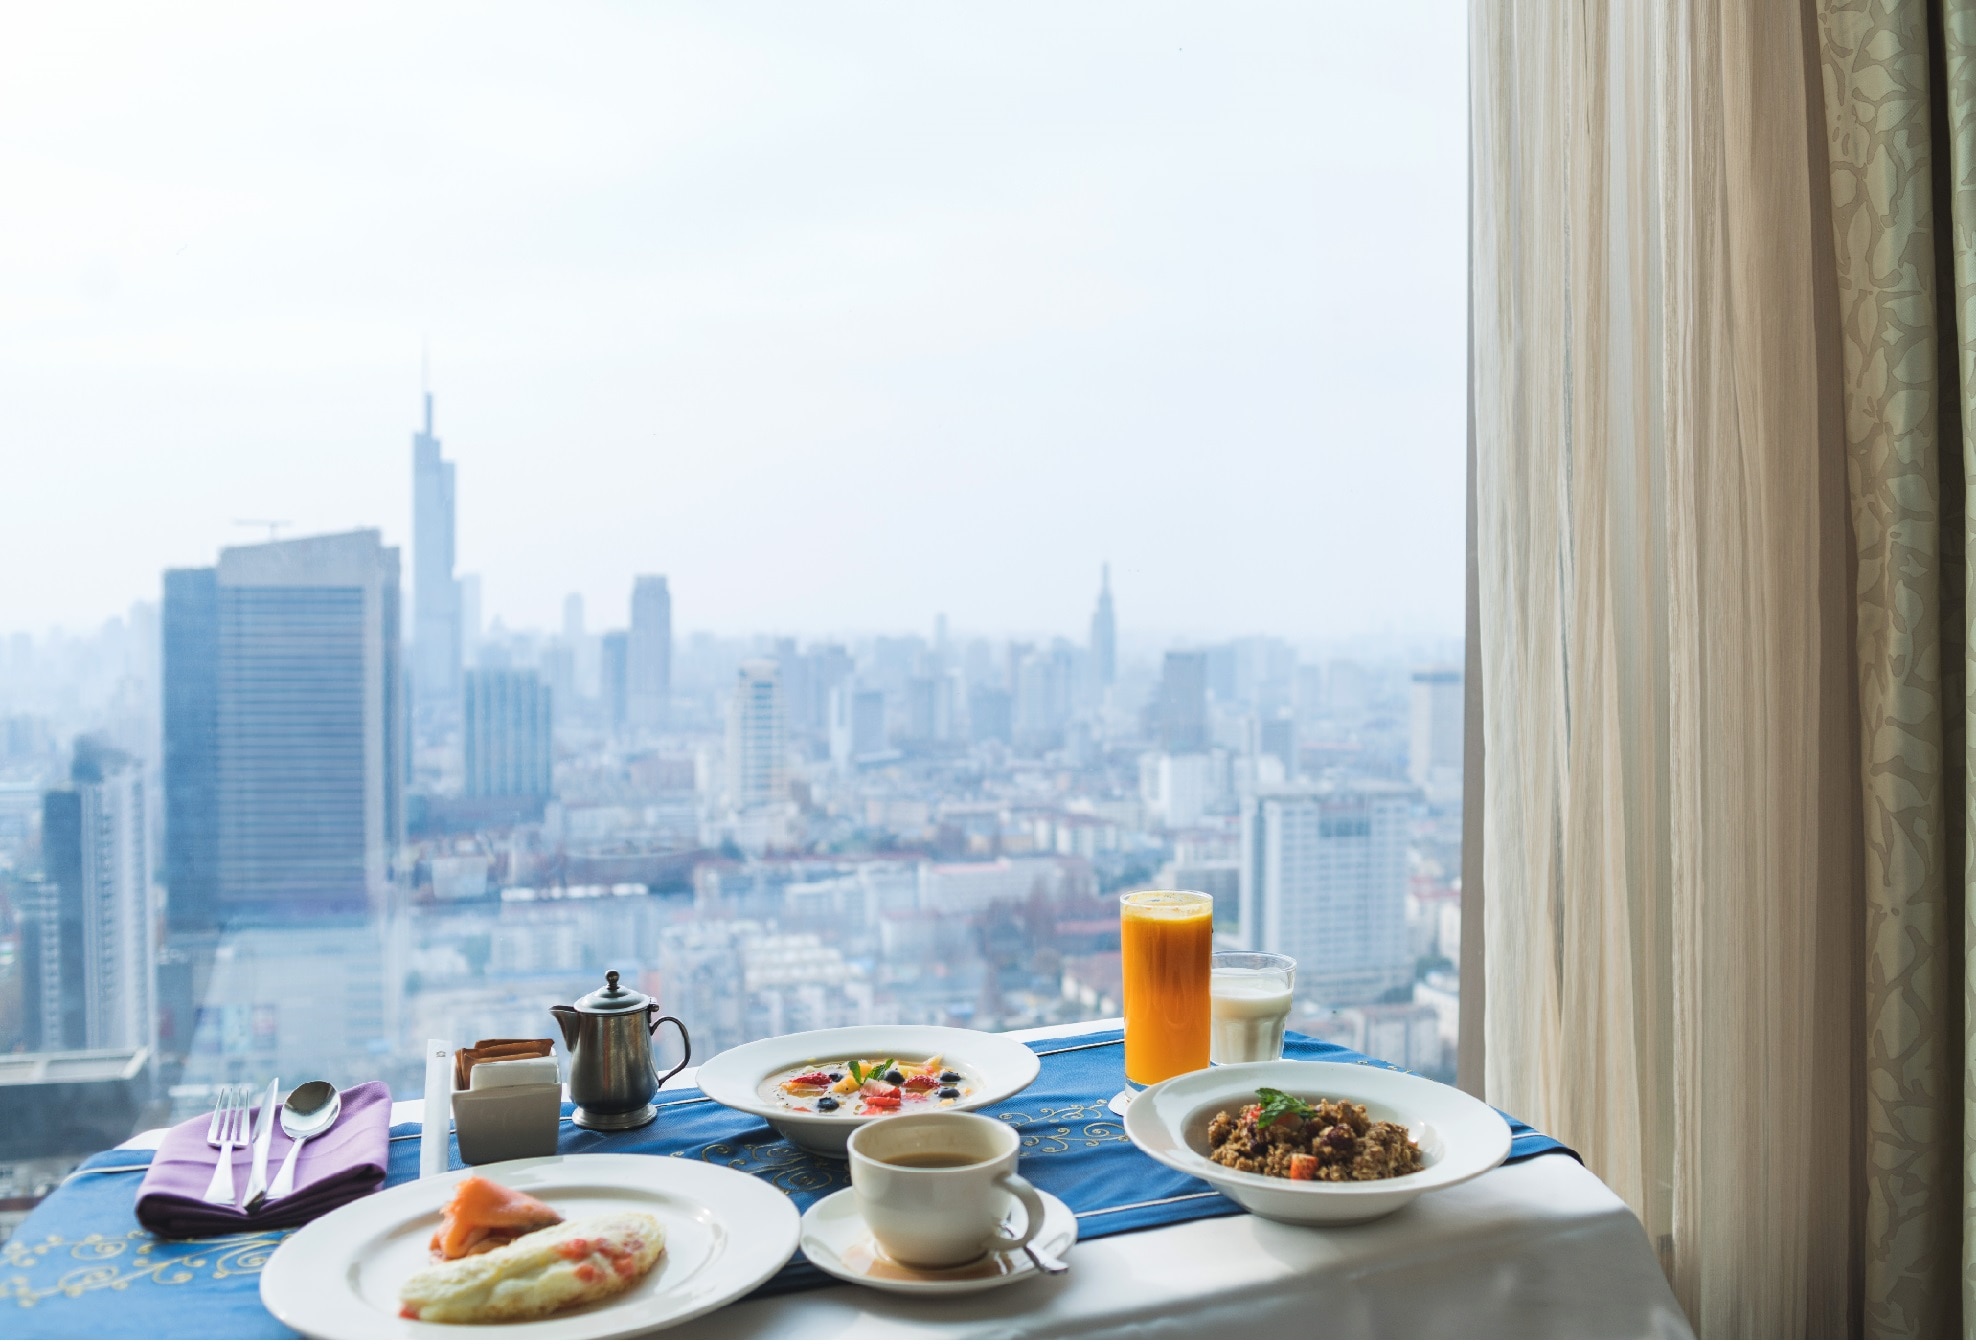 Cityscape view as seen from a skyscraper with breakfast in the foreground